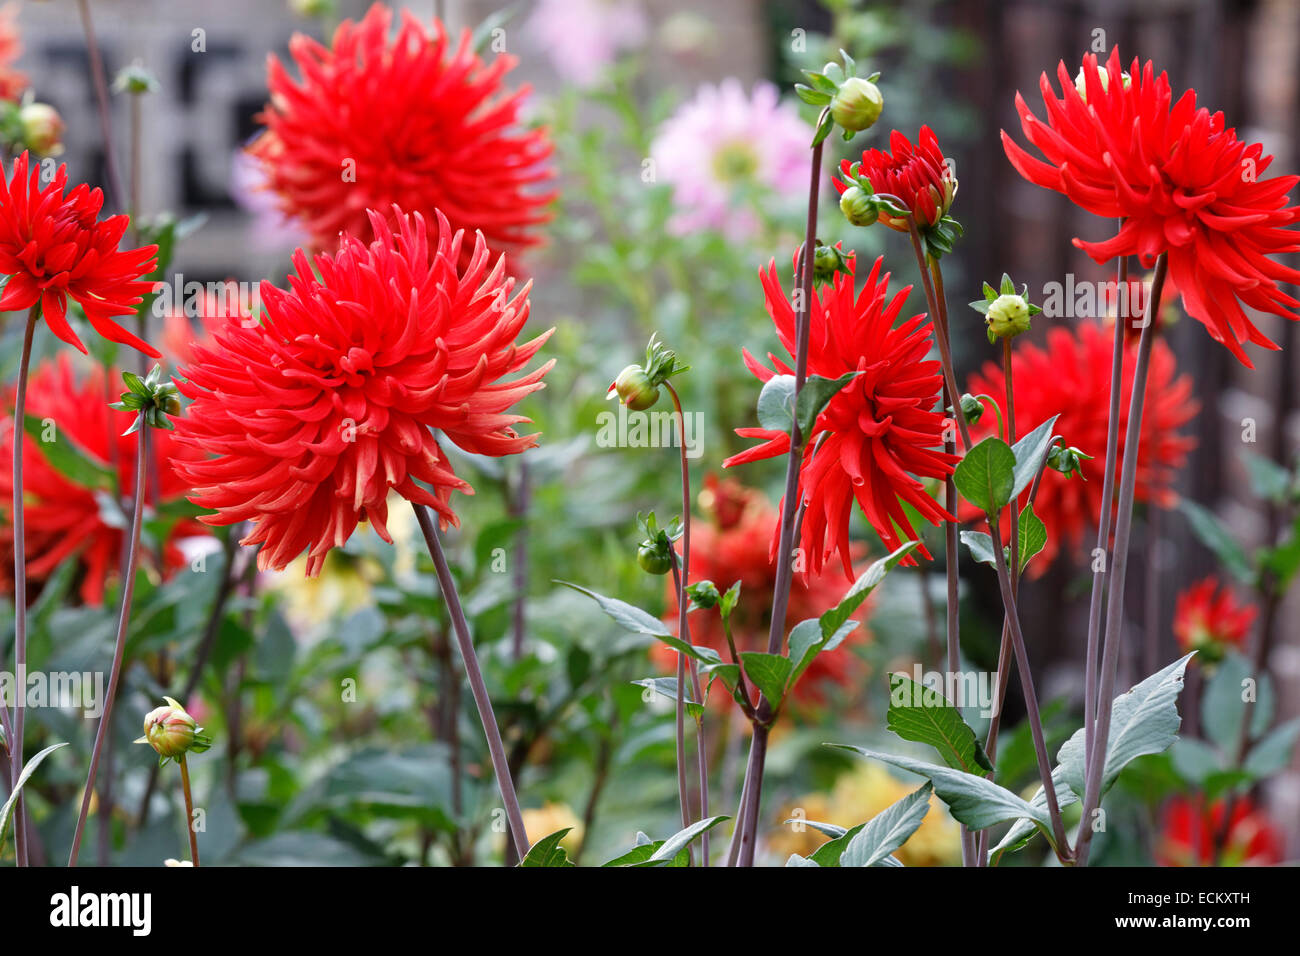 Red Cactus Dahlia 'Bergers Record' in flower border Stock Photo